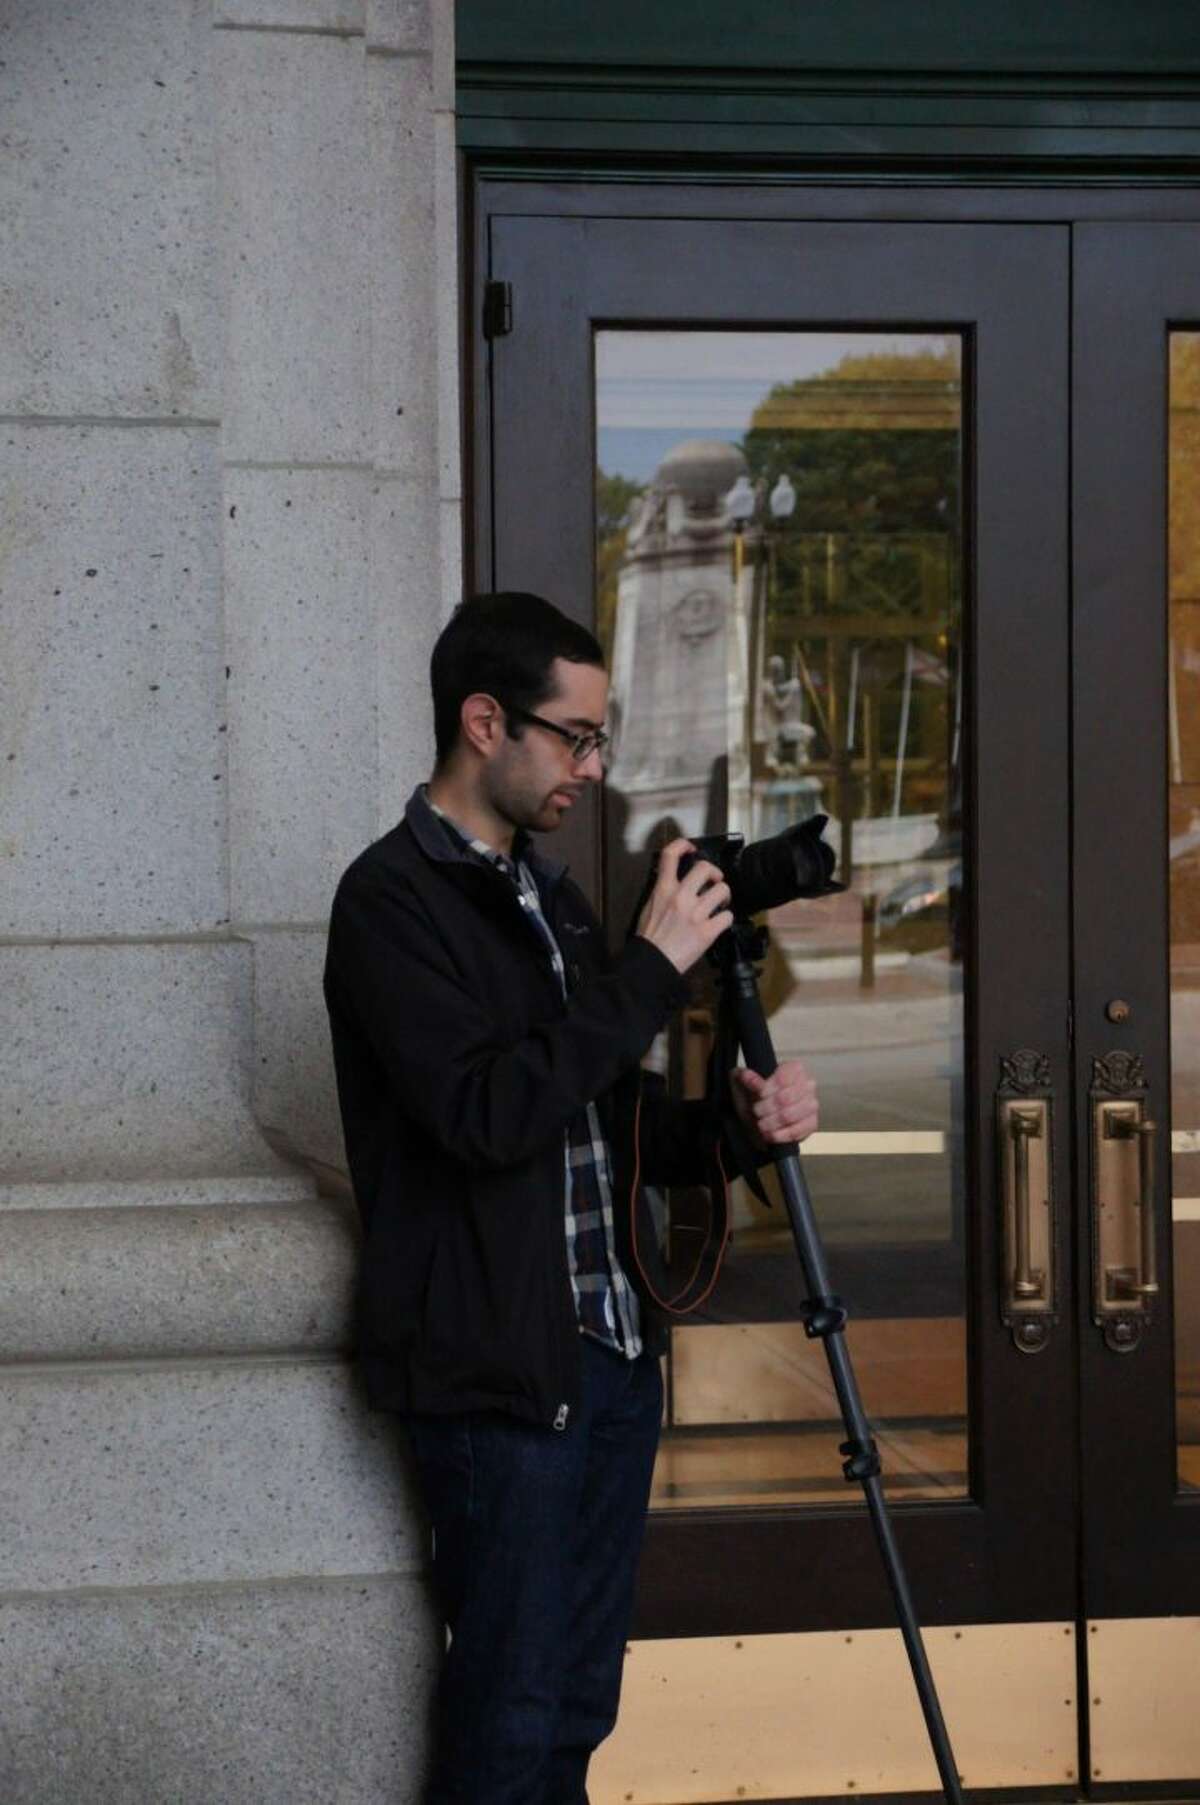 Trumbull resident Kevin Sutherland sets up his camera in the fall of 2013.